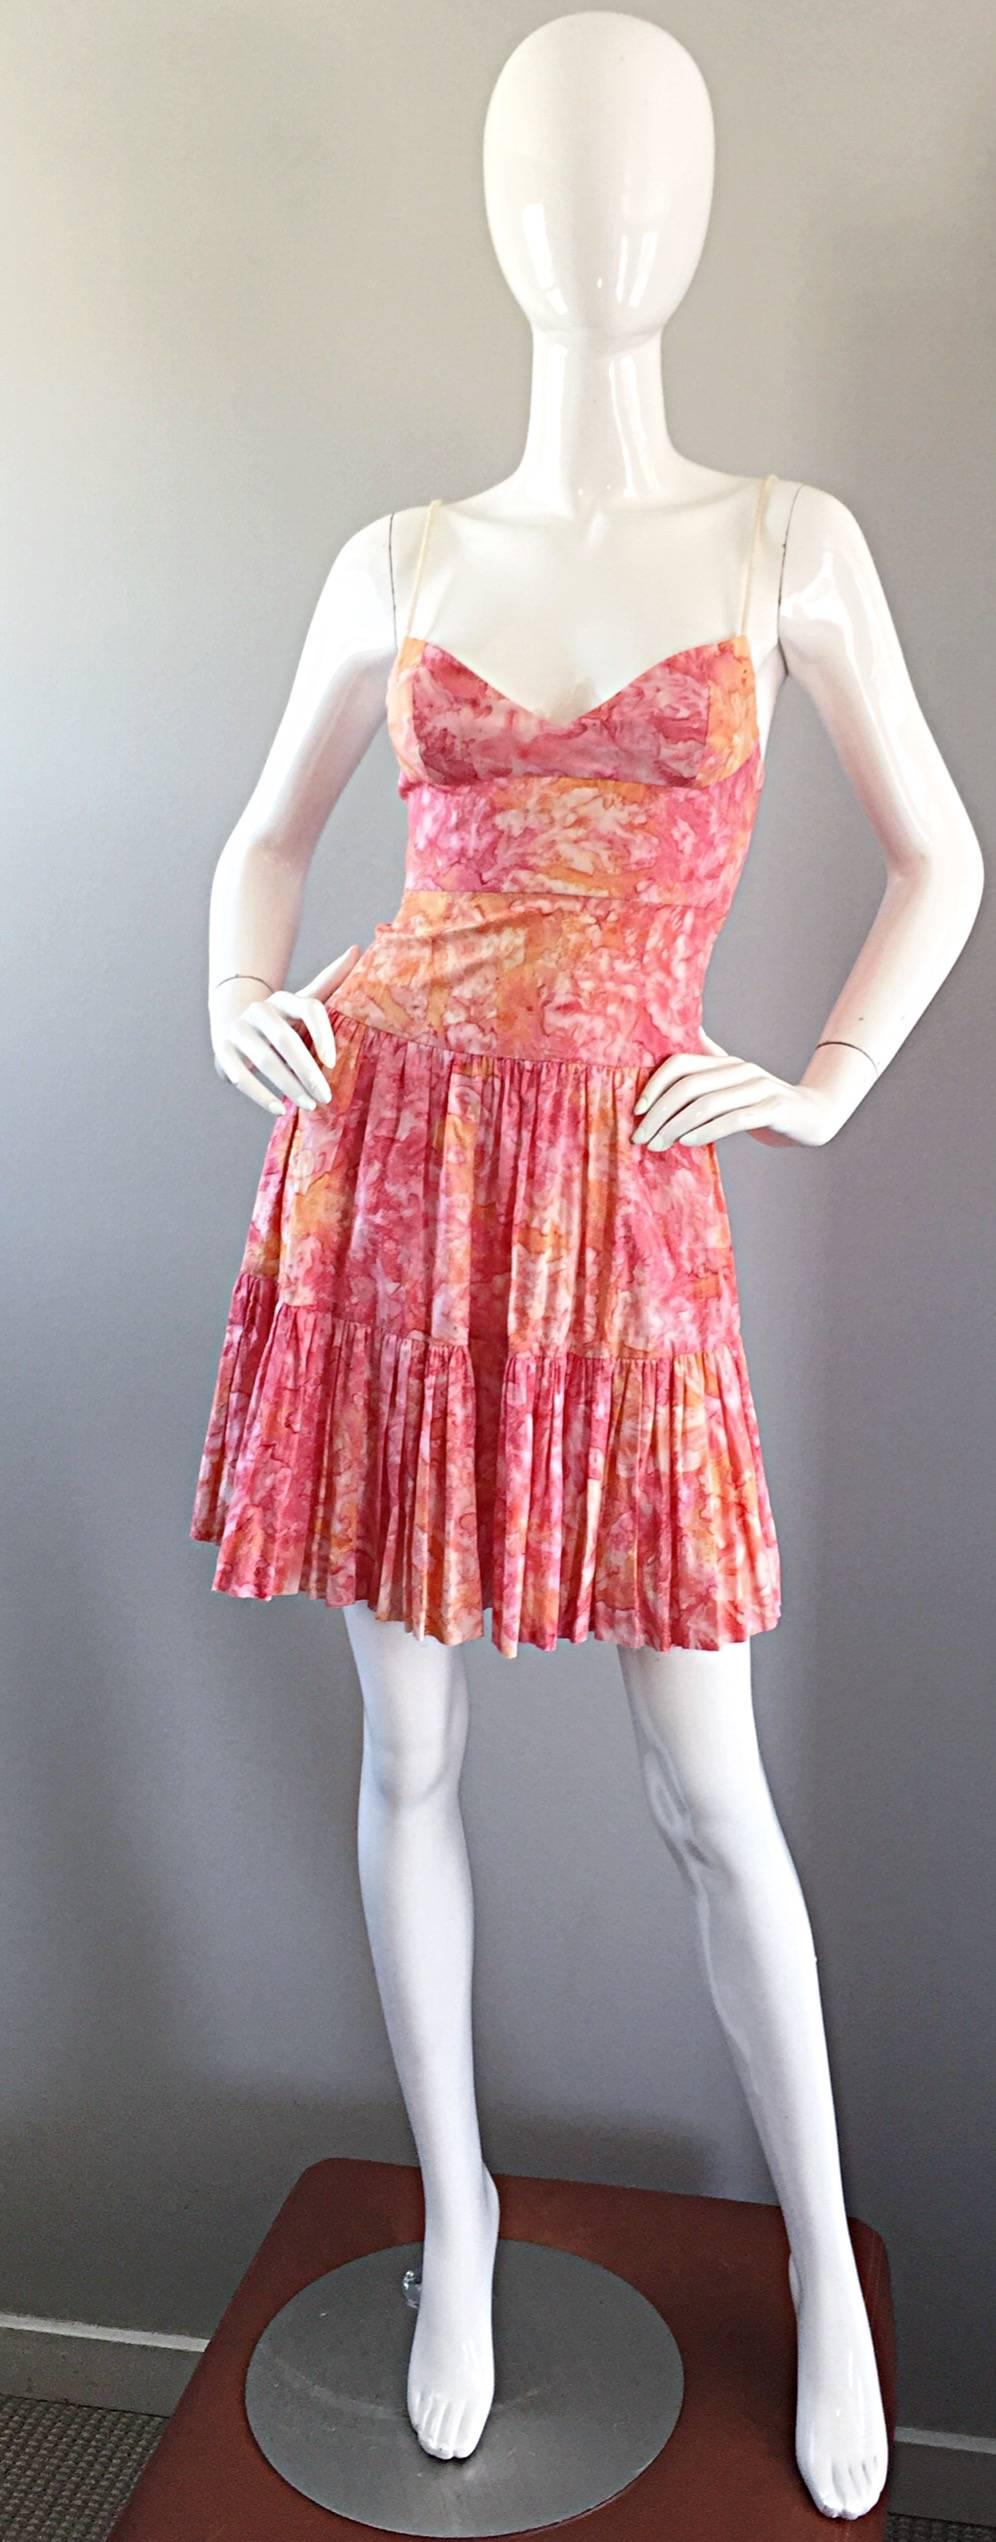 Adorable TRACY FEITH pink, orange and white swirled watercolor print cotton tiered dress! Features tan rope spaghetti straps. Fitted bodice with a tiered ruffle hem. Incredible ode to the 50s with a whimsical flare.Hidden zipper up the back with